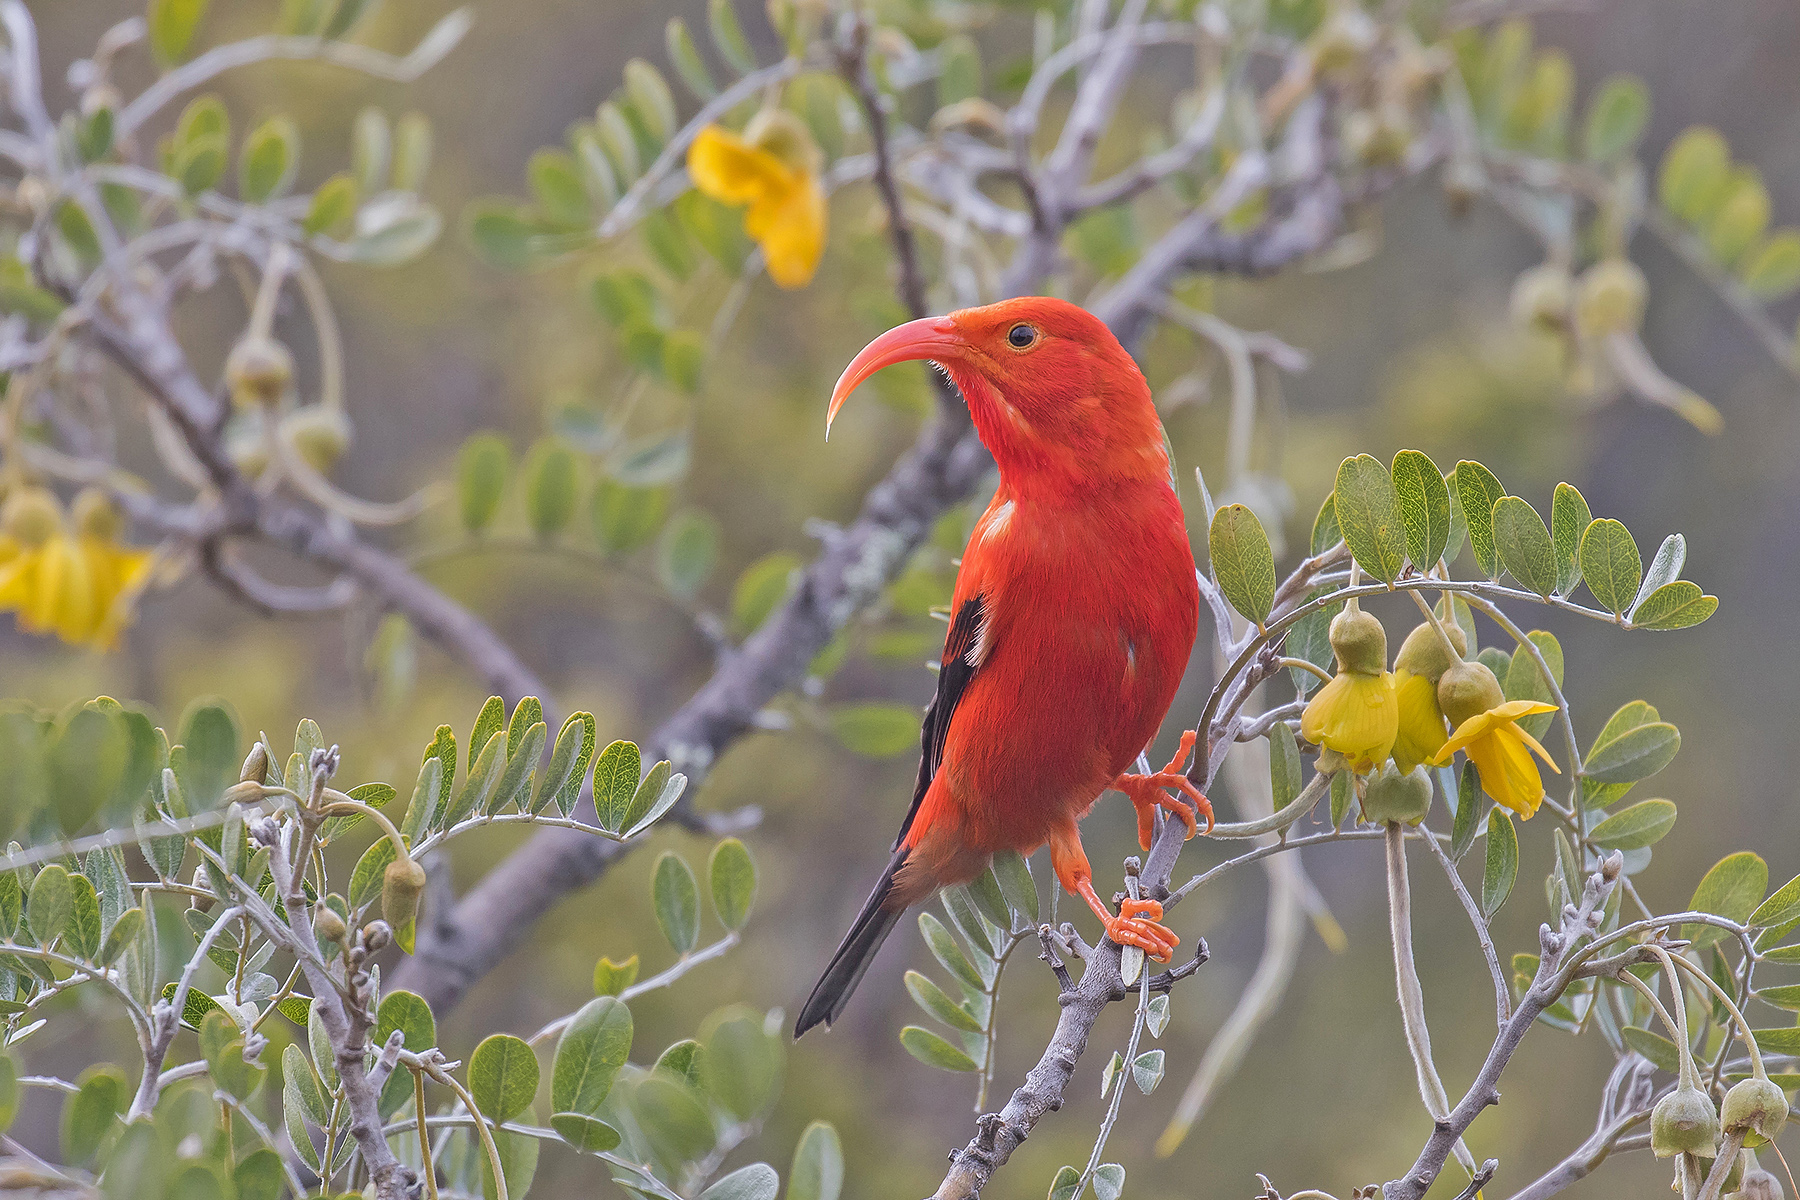 Iiwi on our Hawaii birding tour (image by Pete Morris)